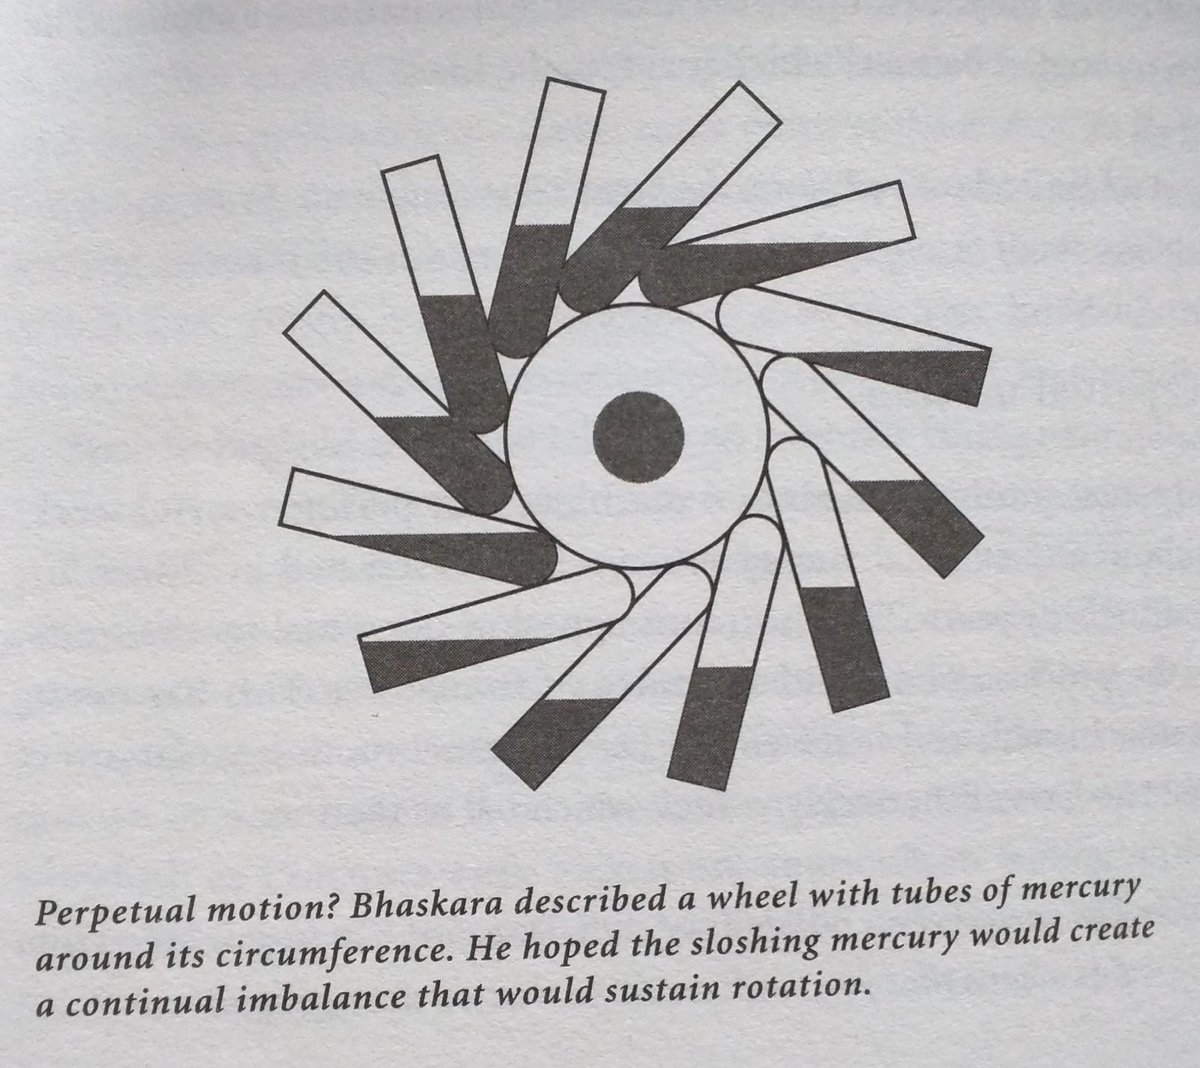 In ~AD 1150, the great mathematician Bhaskara, drawing on earlier scientific and astronomical work of the great thinker Brahmagupta, designed two wheels that he believed would turn forever. He described a wheel with tubes of mercury around its circumference.